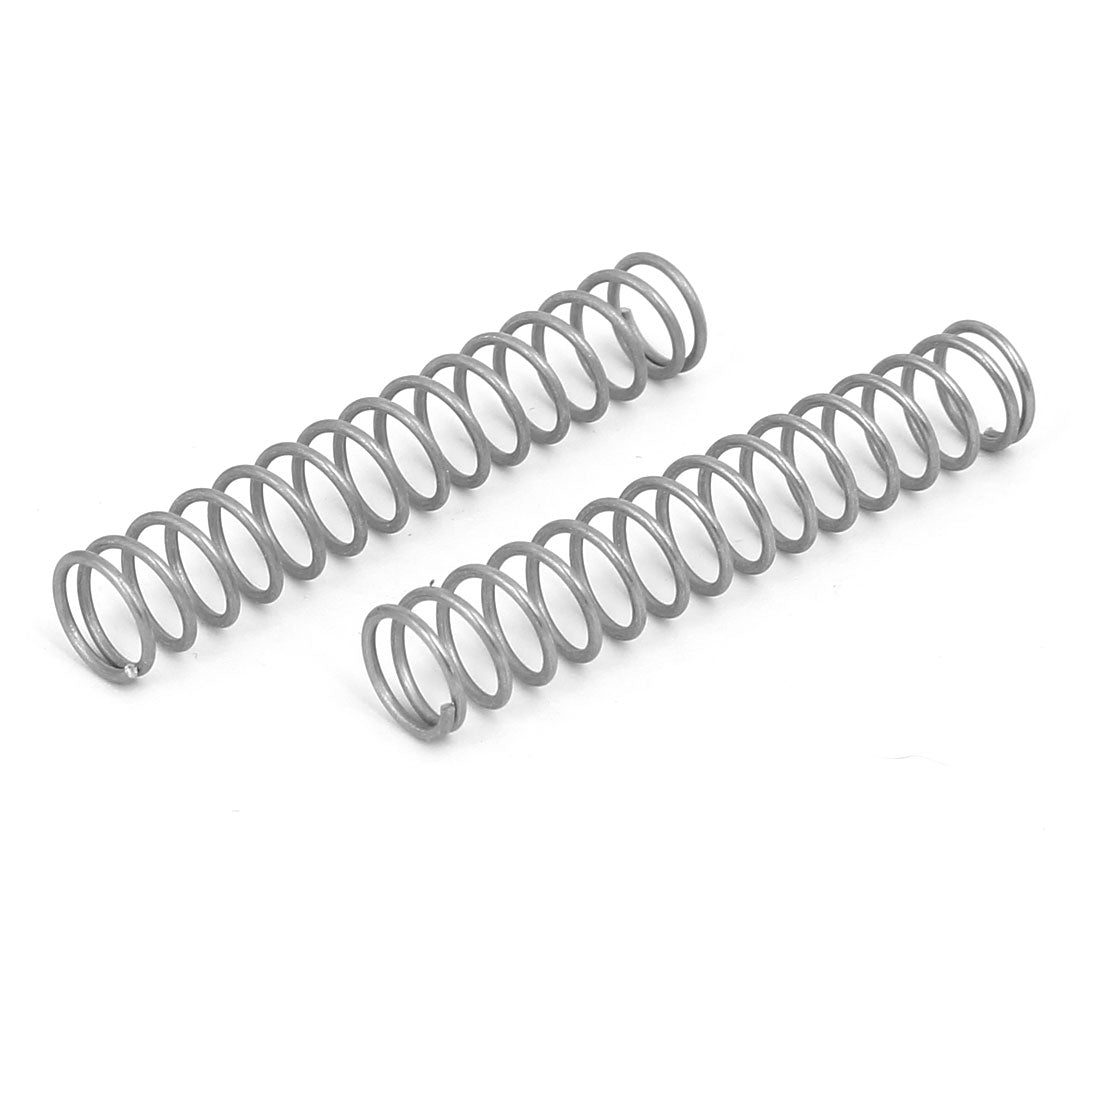 uxcell Uxcell 0.8mmx8mmx45mm 304 Stainless Steel Compression Springs 20pcs